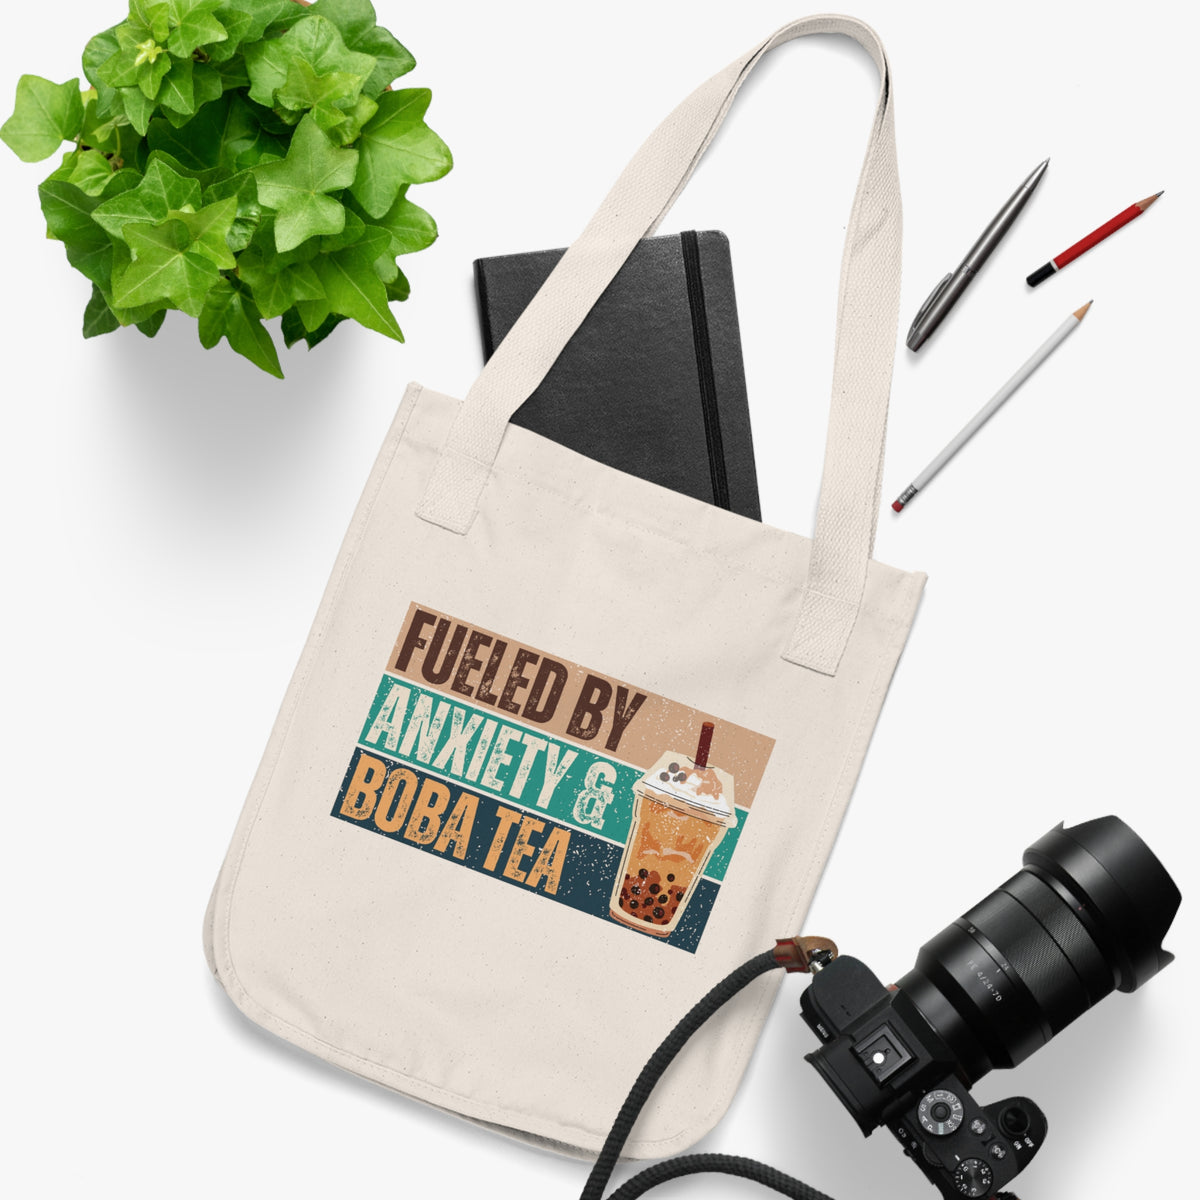 Funny Boba Tea Tote Bag | Fueled by Anxiety Book Bag